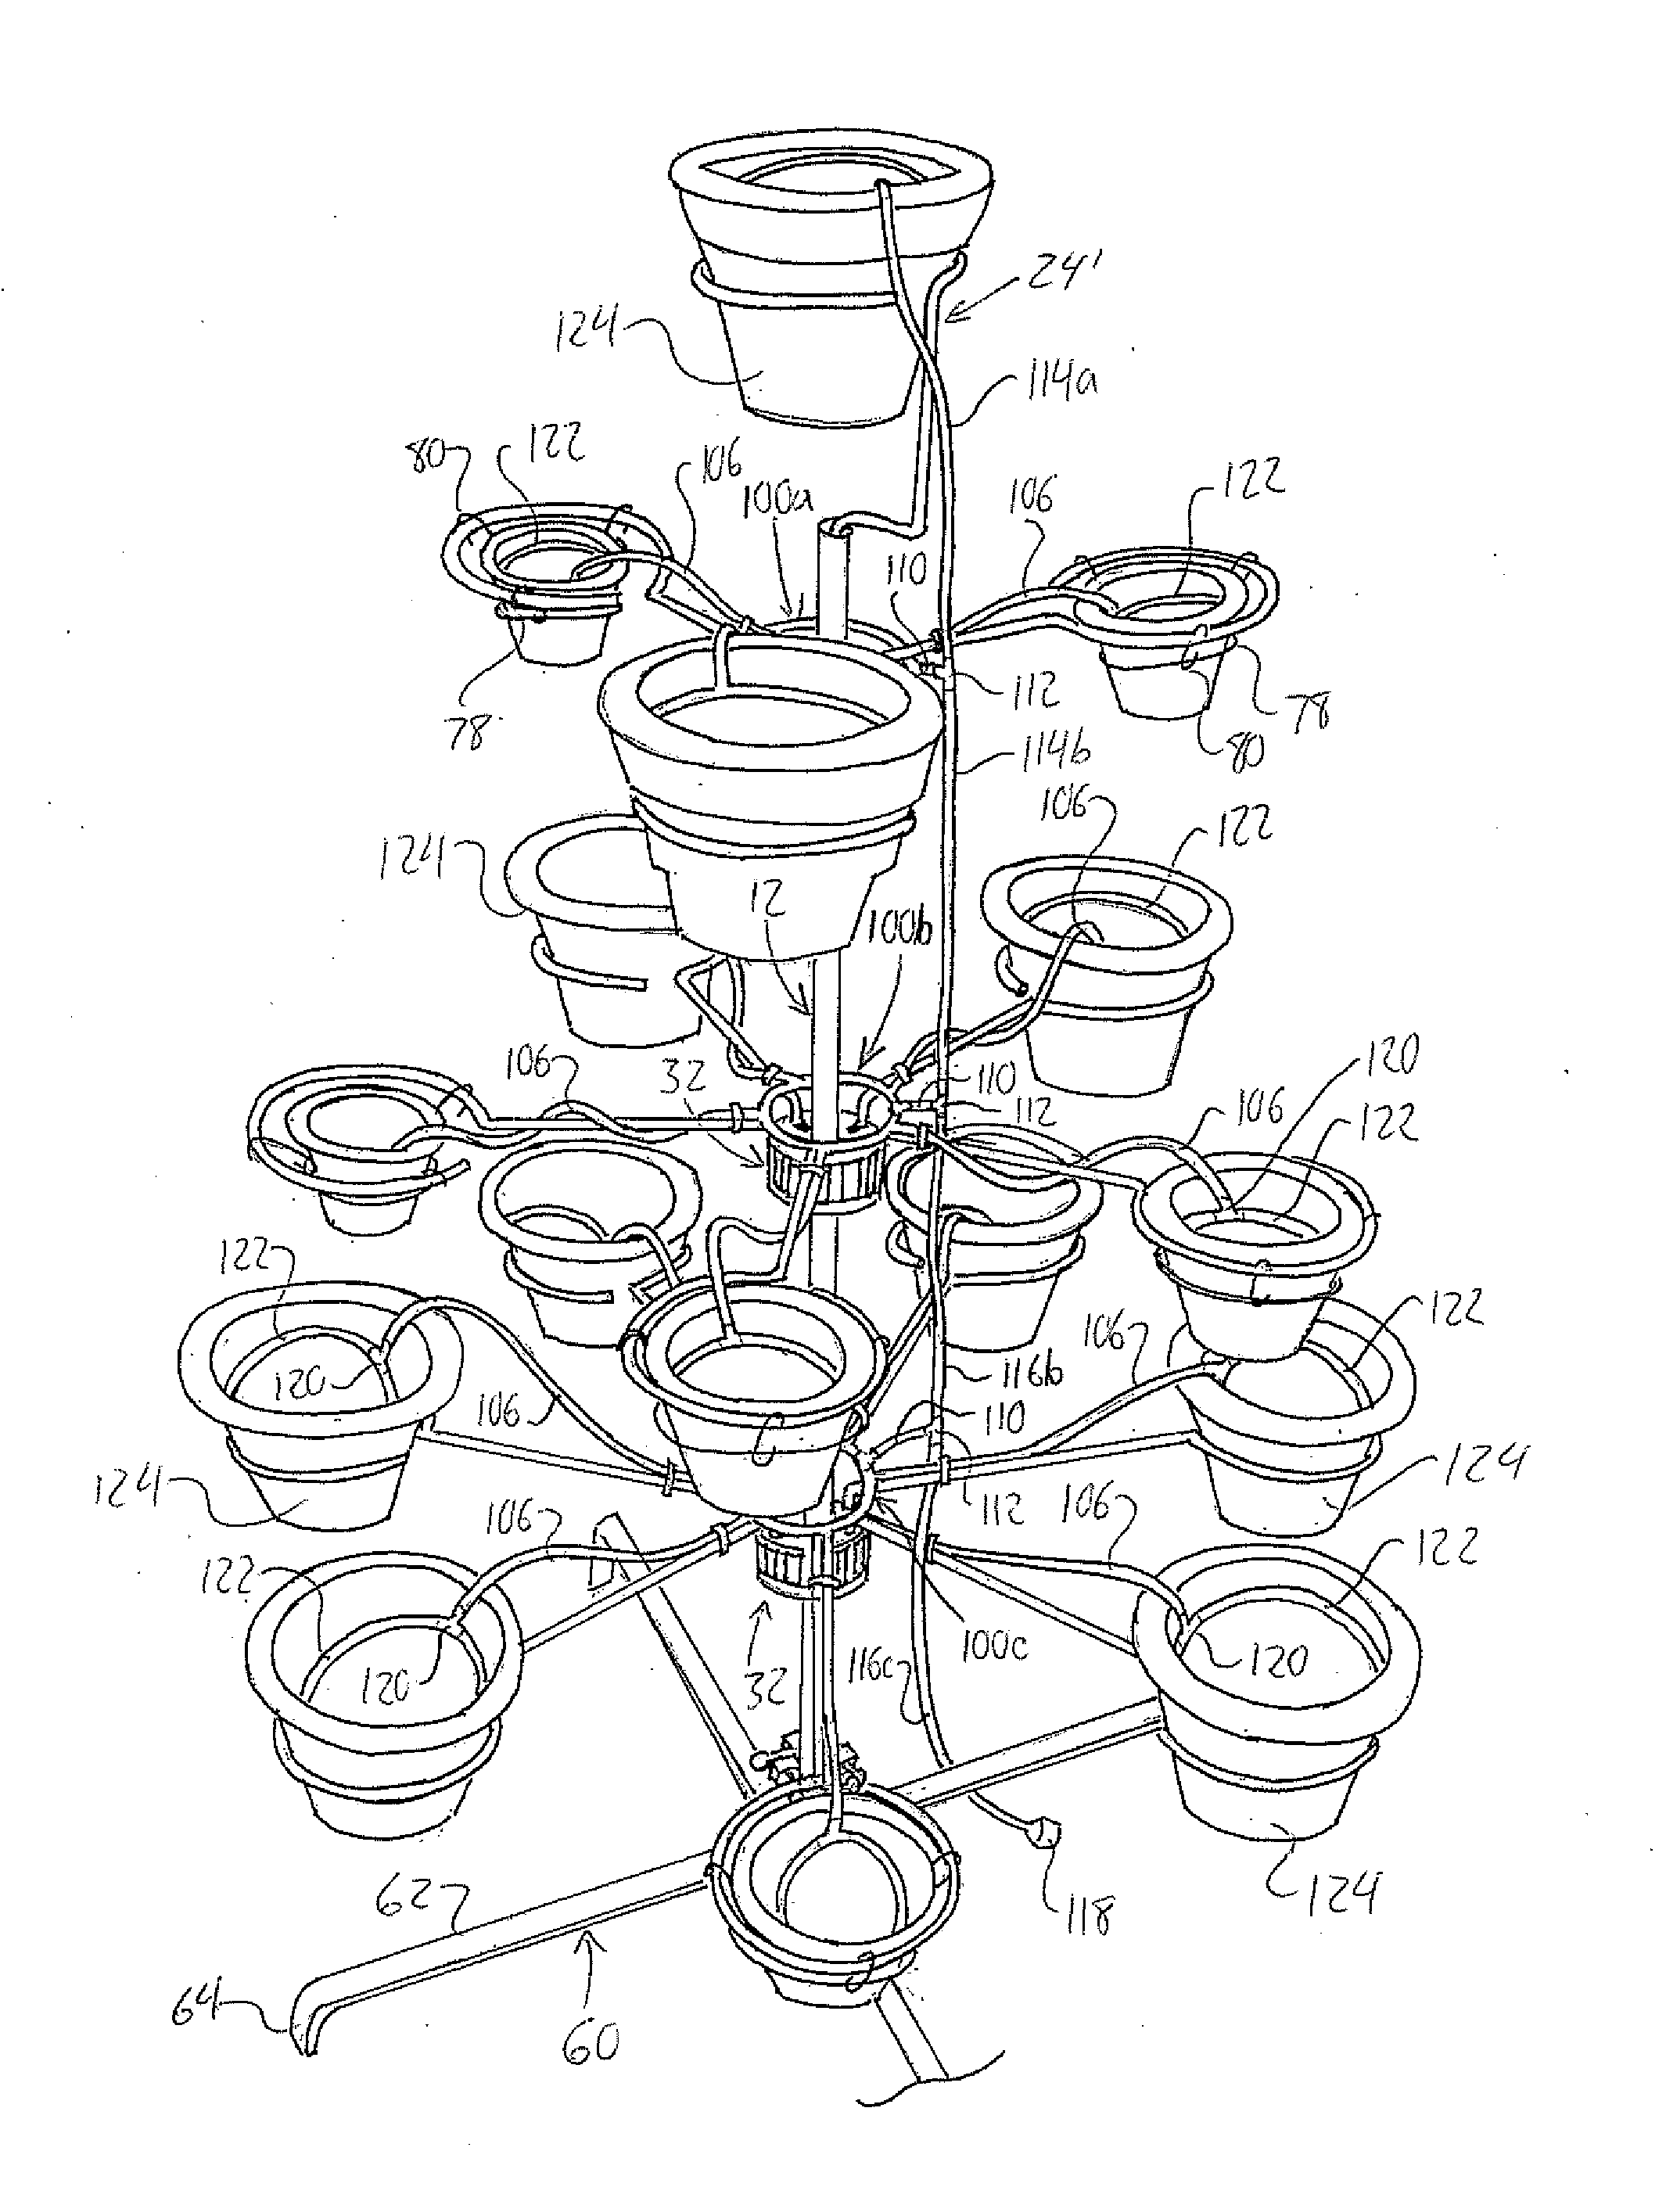 Tree-Style Potted Plant Holder and Hubs, Supports, Adapters and Watering System for Same